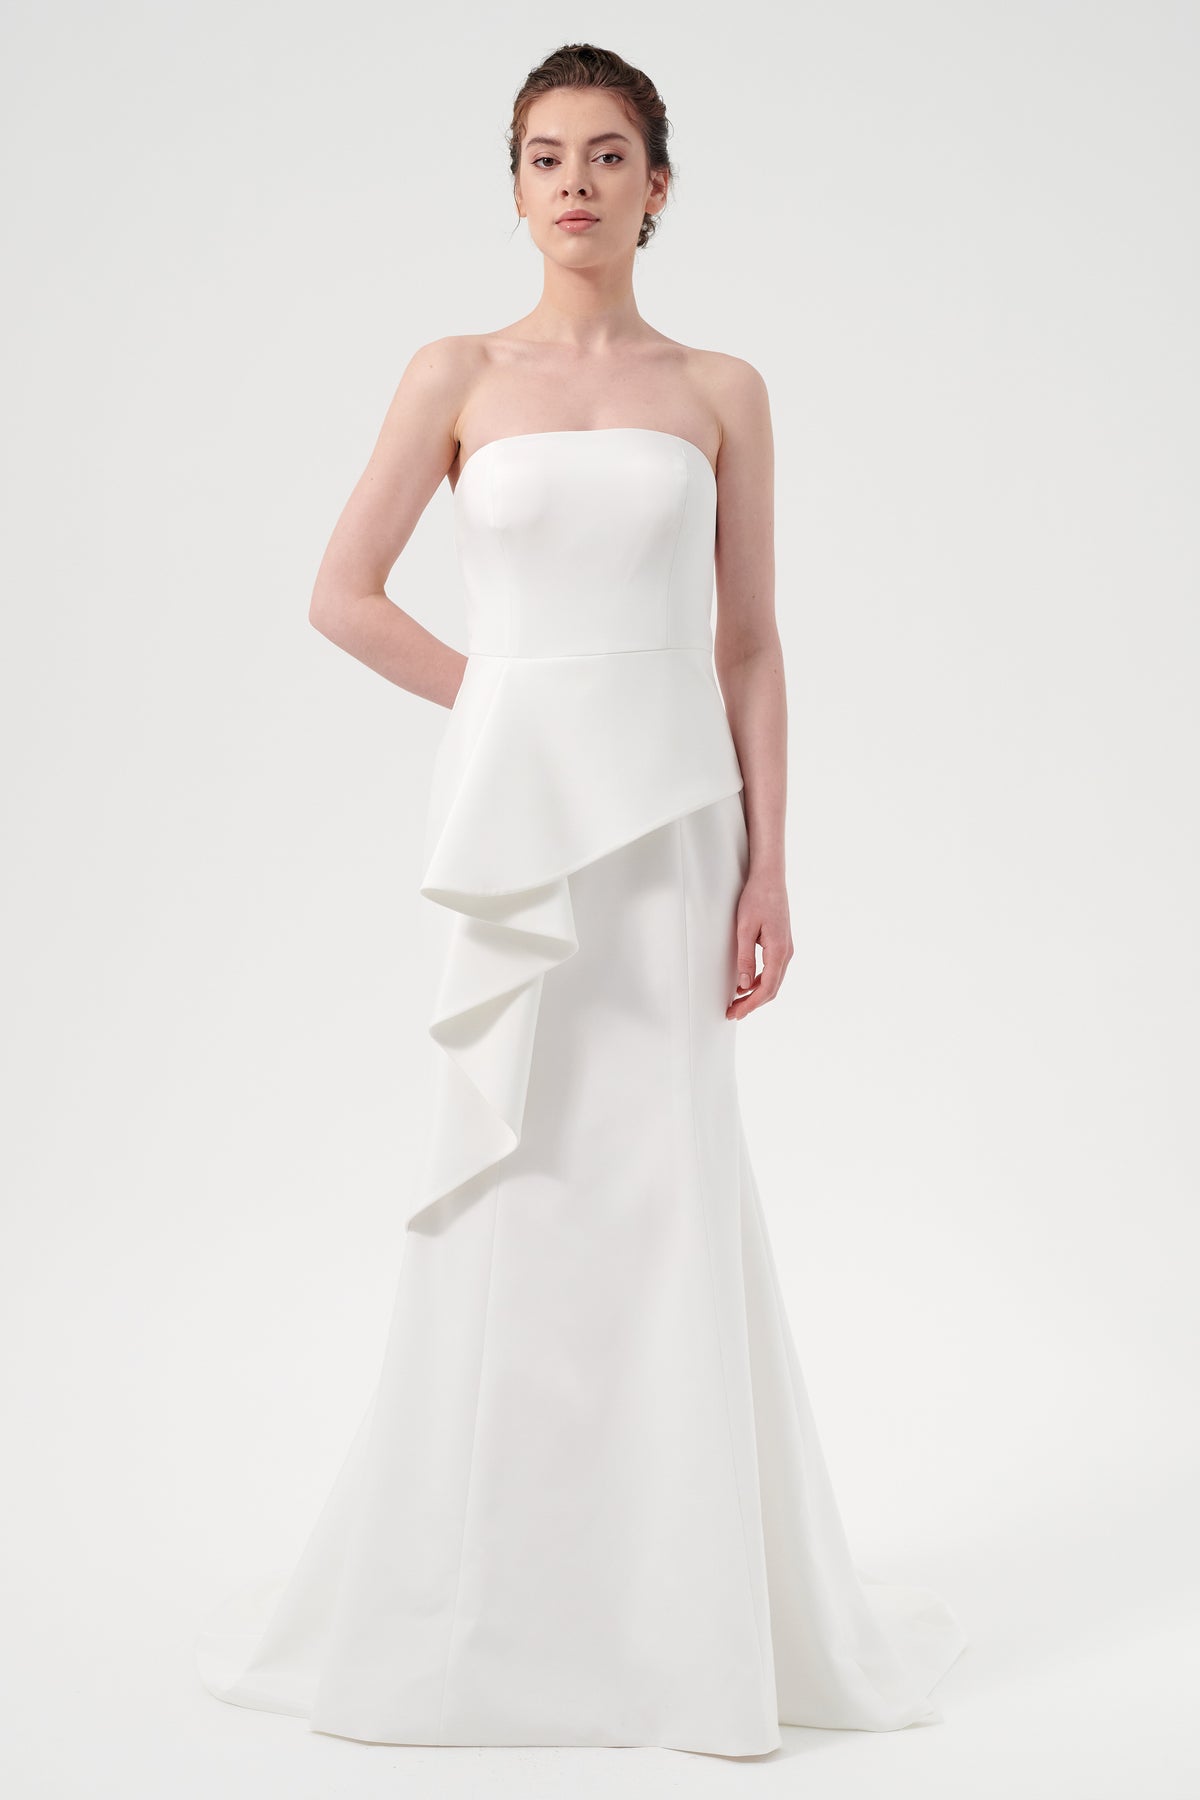 The Strapless, Fluid Asymmetric Peplum Bodice, Fit And Flare Long Dress